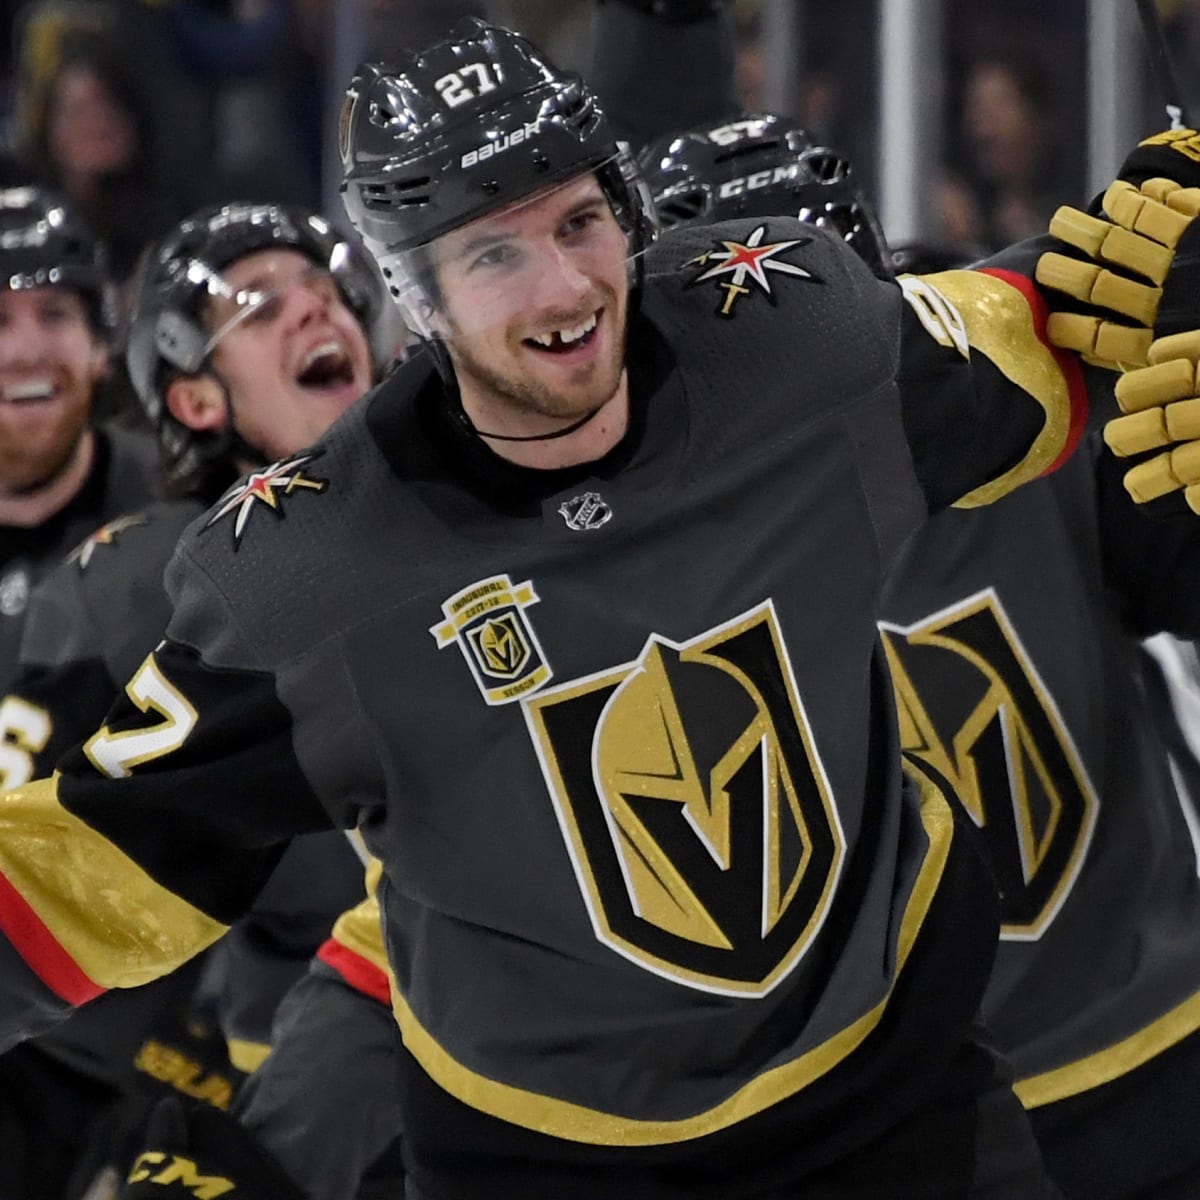 From websites to handguns, Golden Knights protecting team logos